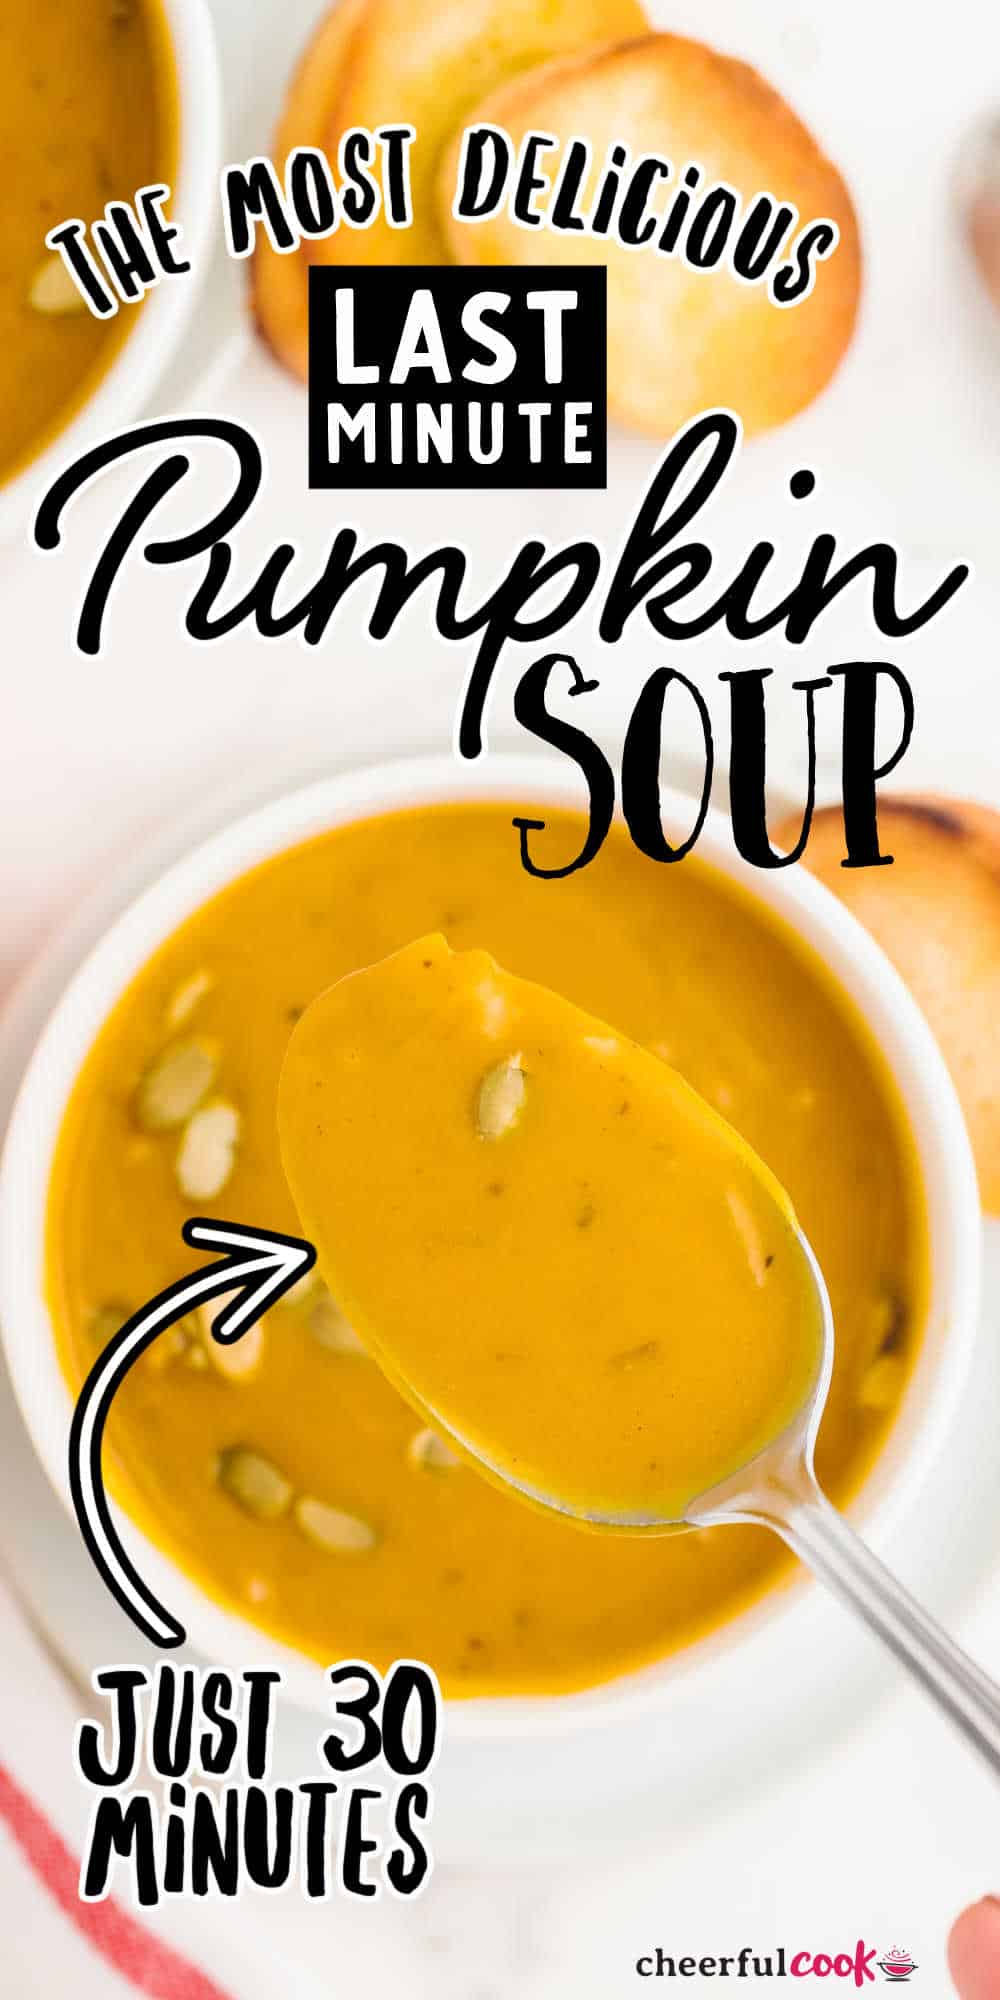 A deliciously creamy, gently spiced Pumpkin Soup that is ready in about 30 minutes. This is last minute recipe you'll want to make again and again. #cheerfulcook #pumpkin #pumpkinsoup #soup #30minutes #creamy #Chinese5spice via @cheerfulcook